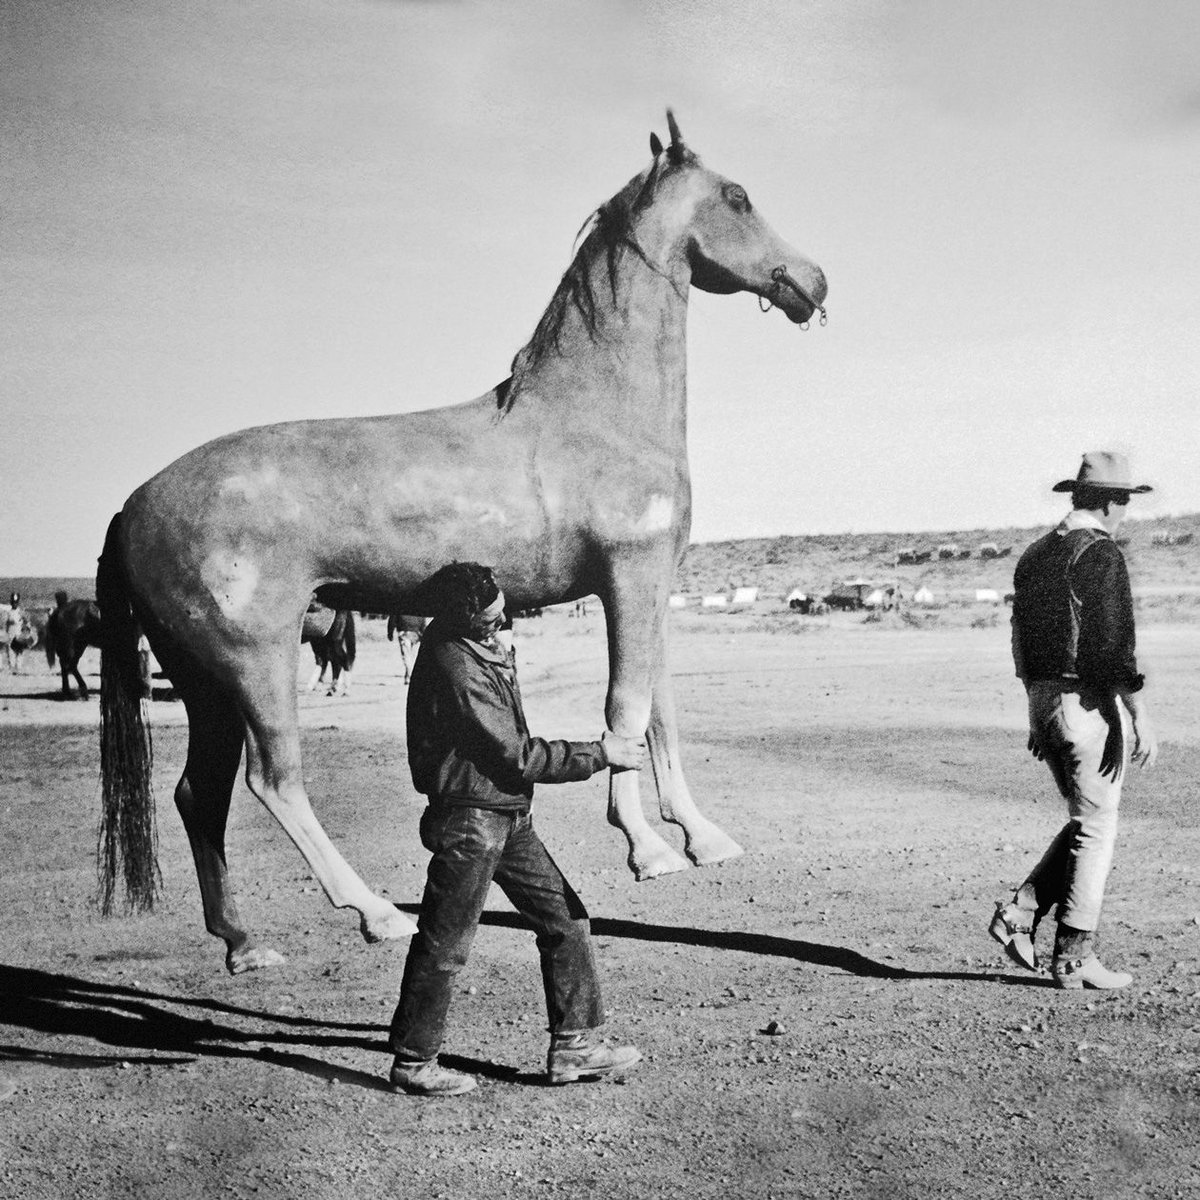 1959: John Wayne followed by his horse while filming The Alamo _ For more pictures like this, follow @retronauthome @retronauthq